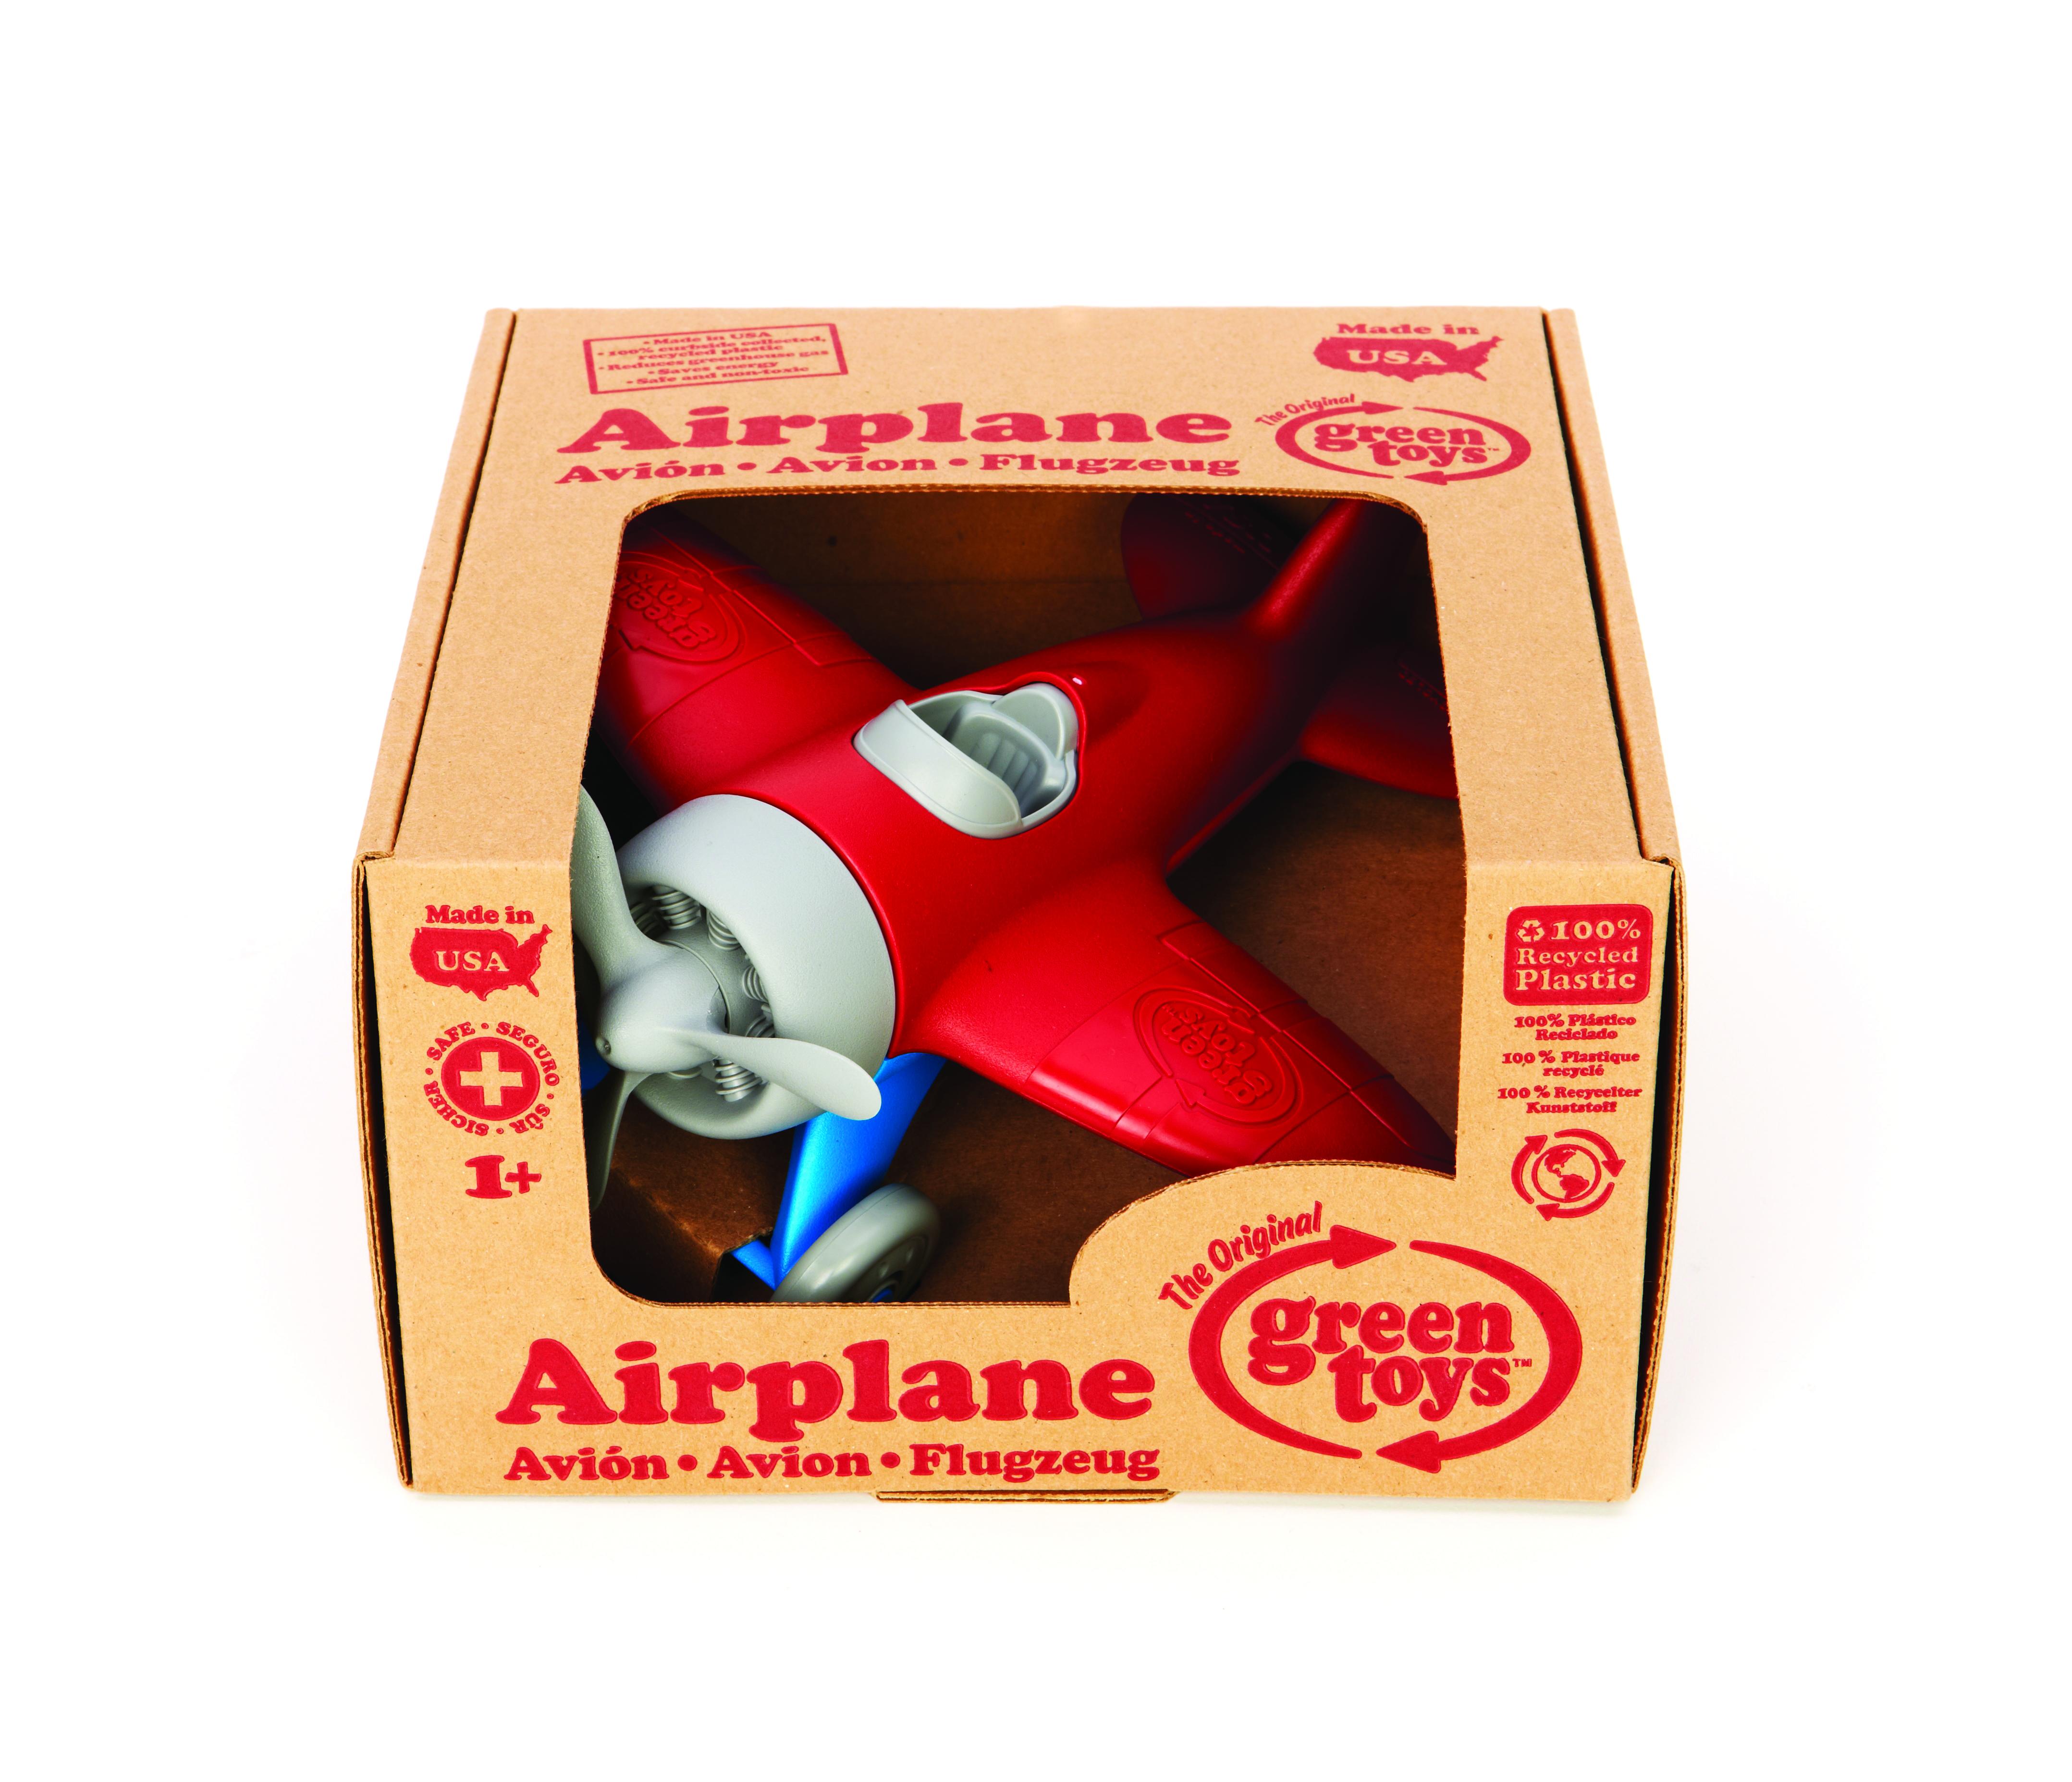 Red plane in the manufacturer's packaging.